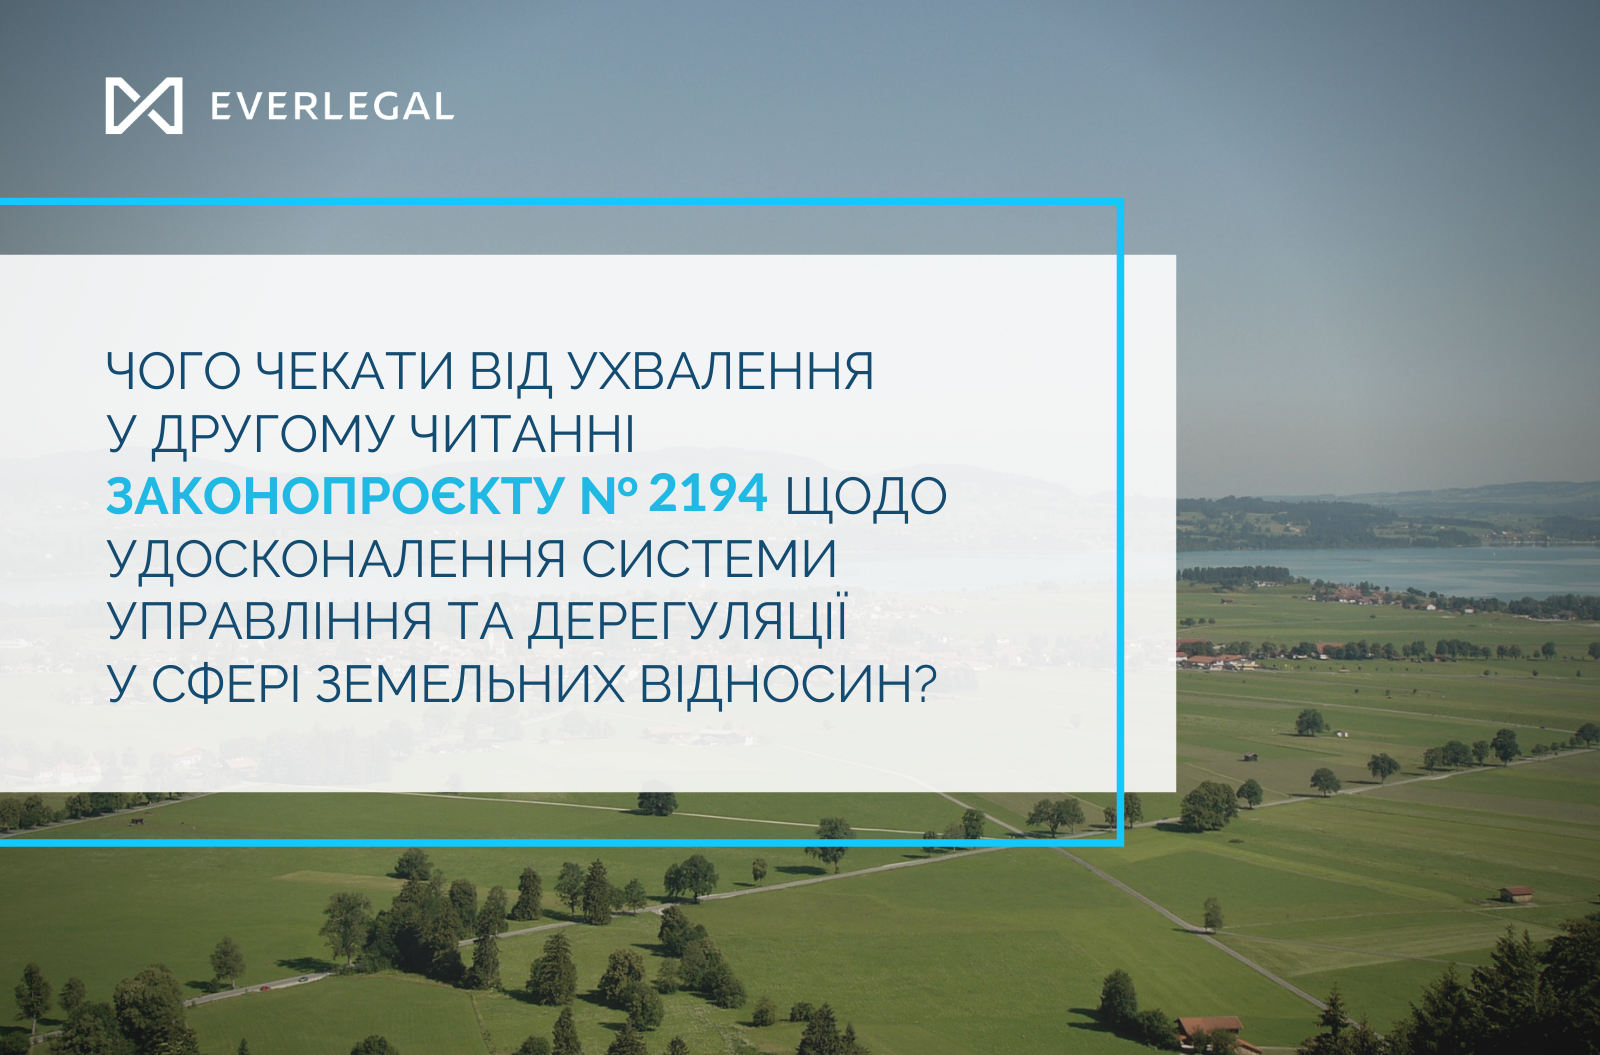 What to expect from the adoption in the second reading of the bill № 2194 about improving the system of management and deregulation in the field of land relations?